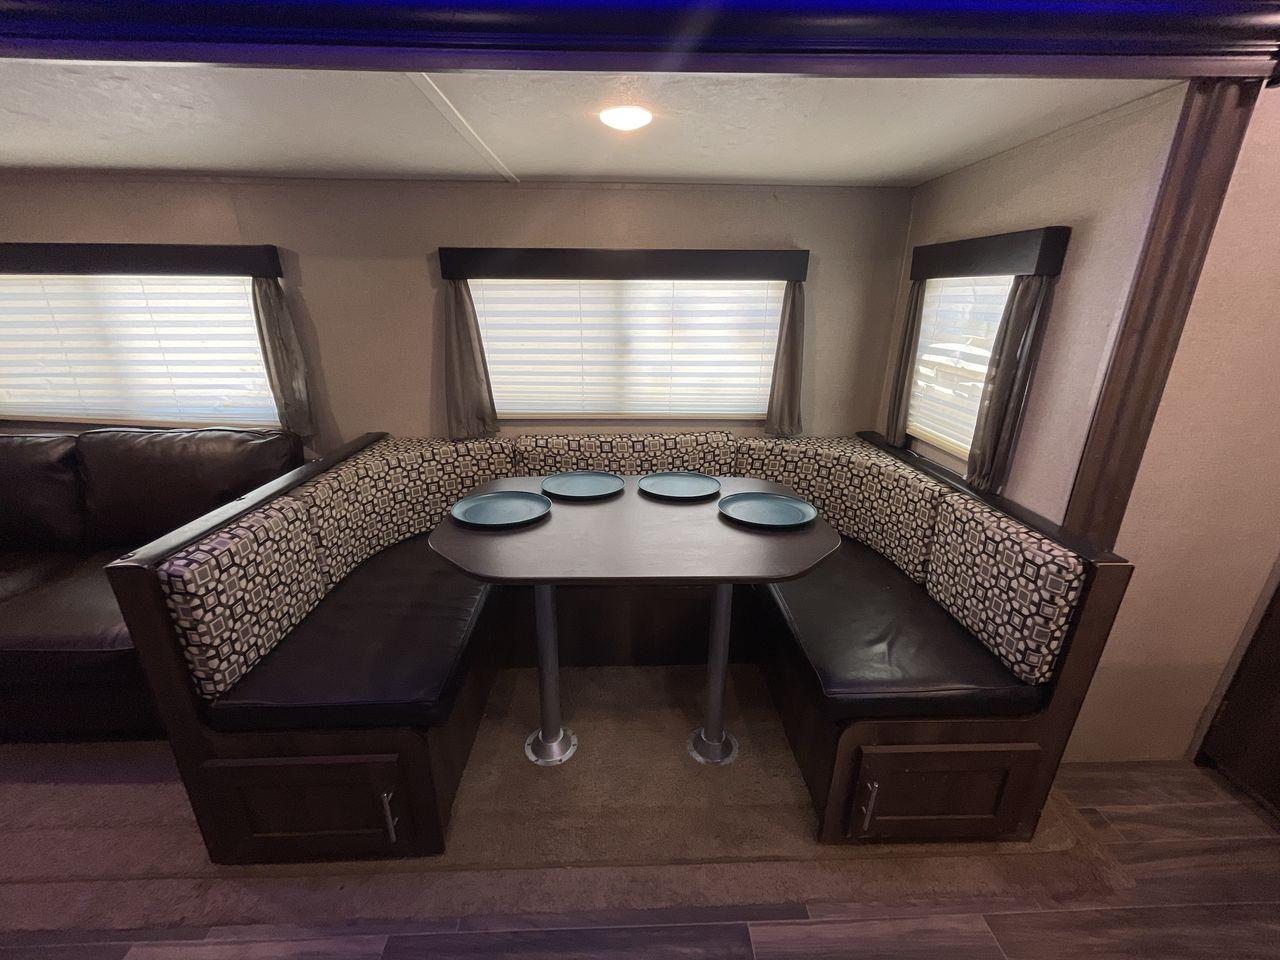 2019 TAN FOREST RIVER SHASTA 28BH (5ZT2SSTB4KE) , Length: 33.67 ft. | Slides: 1 transmission, located at 4319 N Main St, Cleburne, TX, 76033, (817) 678-5133, 32.385960, -97.391212 - Are you looking for the perfect travel trailer to explore the local driving highlights around Cleburne, TX? Look no further than this 2019 FOREST RIVER SHASTA 28BH, available for sale at RV Depot in Cleburne, TX. With its affordable price of $32,995, this travel trailer is perfect for those seeking - Photo #14